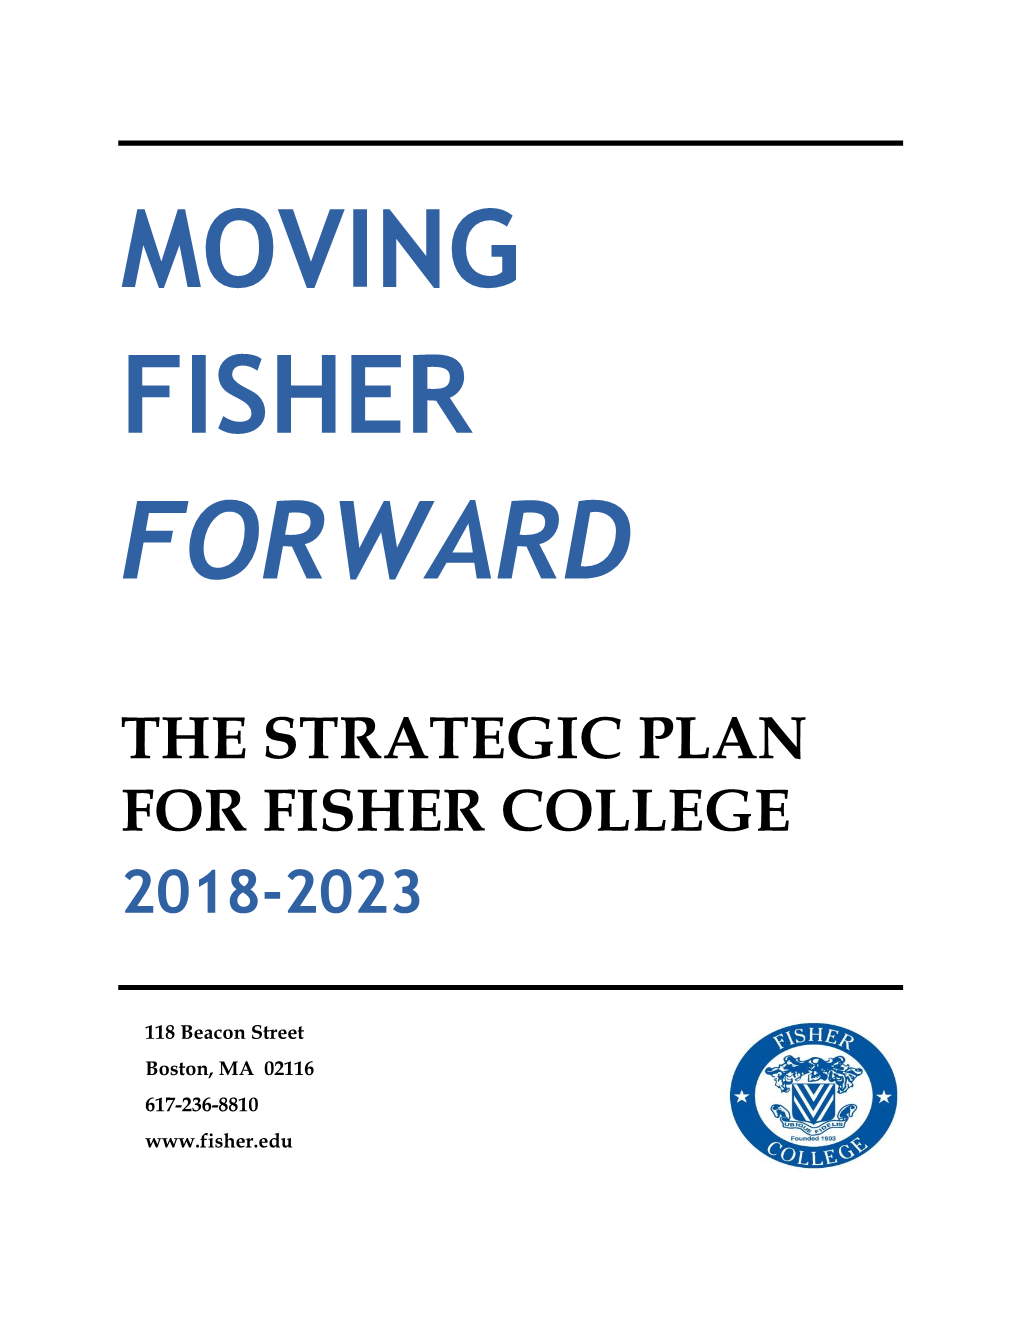 The Strategic Plan for Fisher College